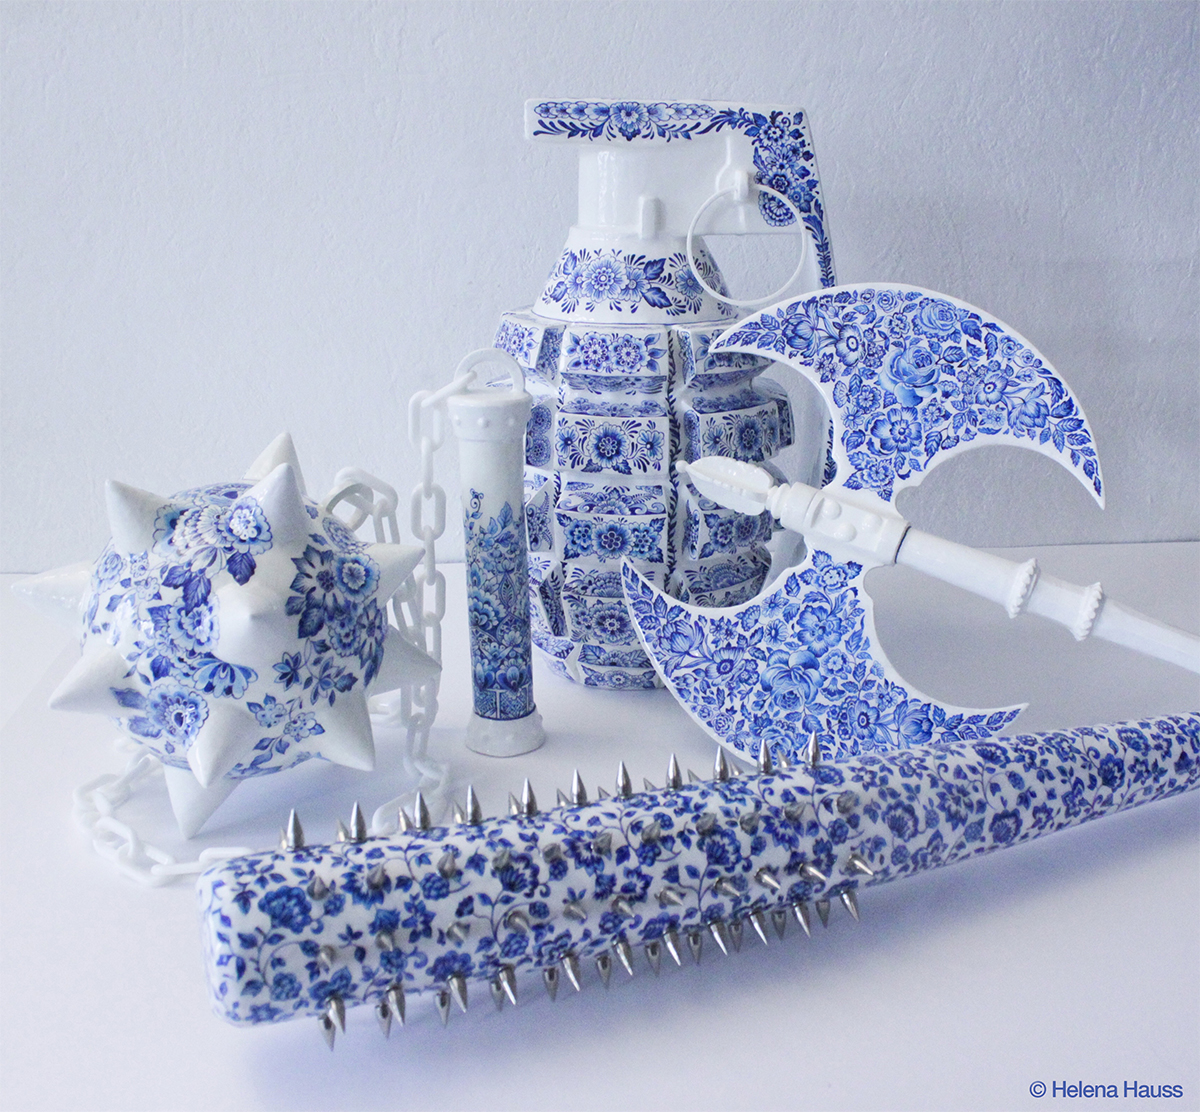 Delft-Style Weaponry